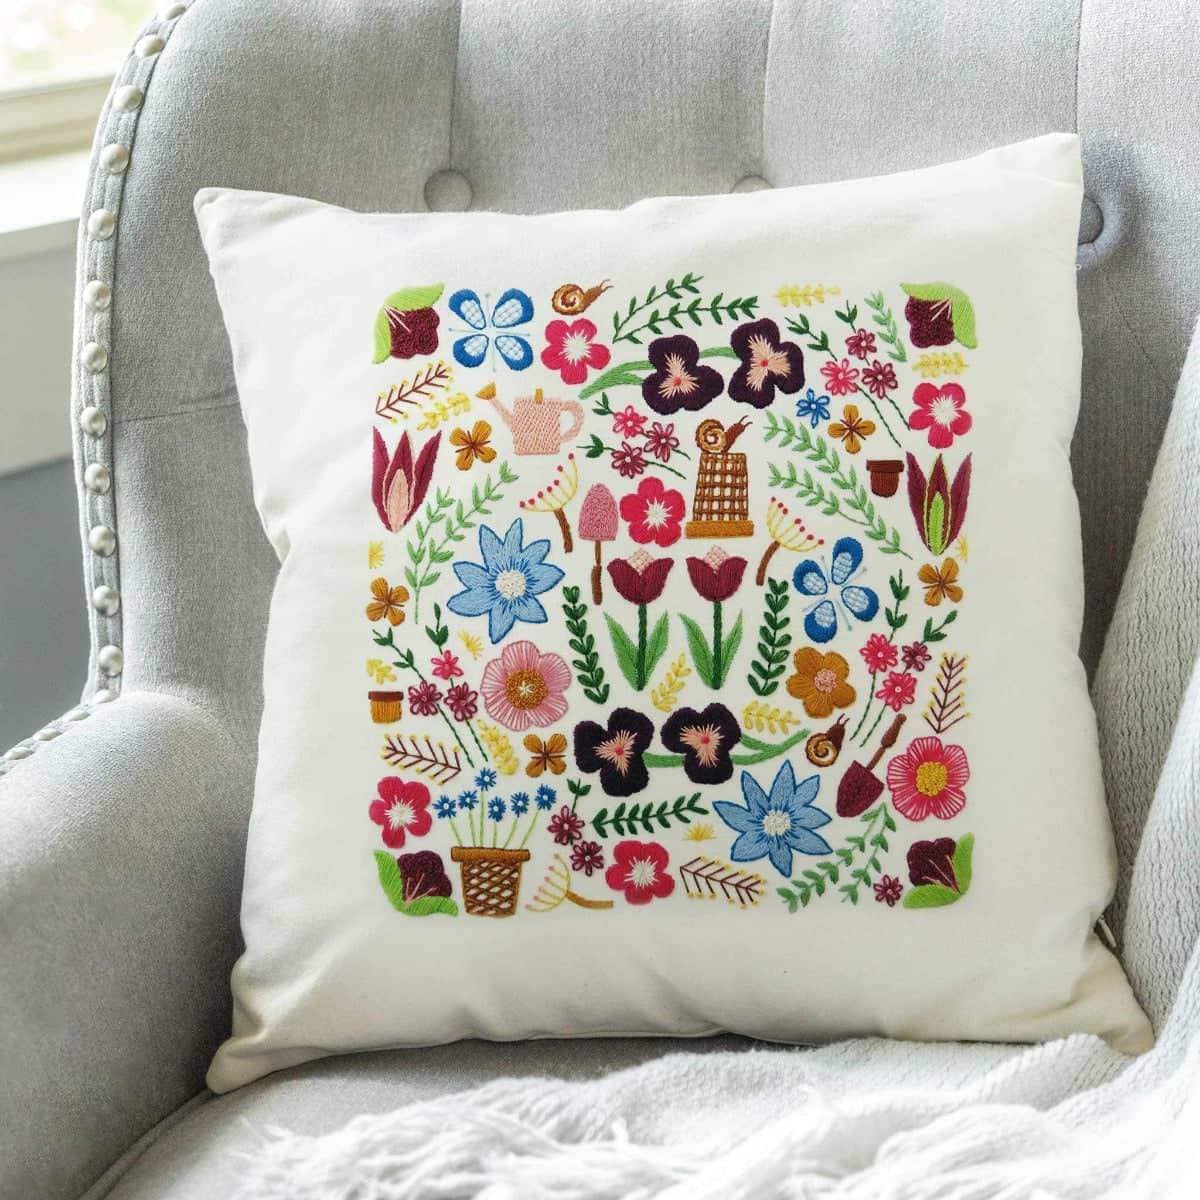 Garden Glory, Hand Embroidery Pattern , PDF Download , StitchDoodles , embroidery hoop kit, embroidery kits for adults, embroidery kits for beginners, hand embroidery, modern embroidery kits, PDF pattern, unique embroidery kits , StitchDoodles , shop.stitchdoodles.com